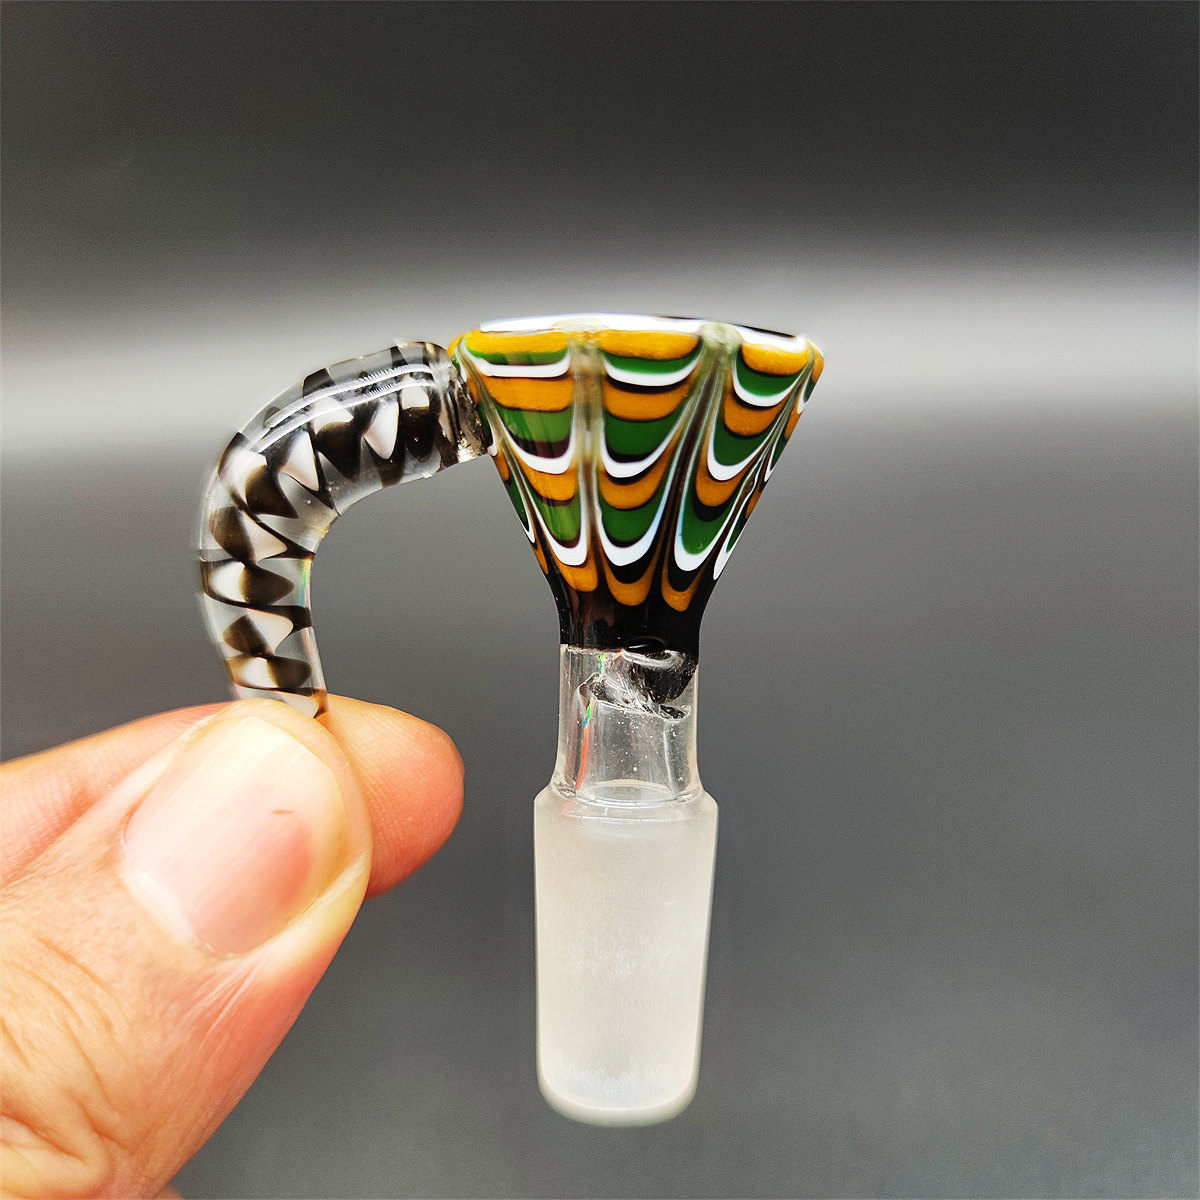 2023 Wig Wag 14mm Thick Bowl Piece Bong Glass Slide Water Pipes Cream Peacock Feather Horn Holder Tip Heady Slides Colorful Bowls Male Smoking Accessory